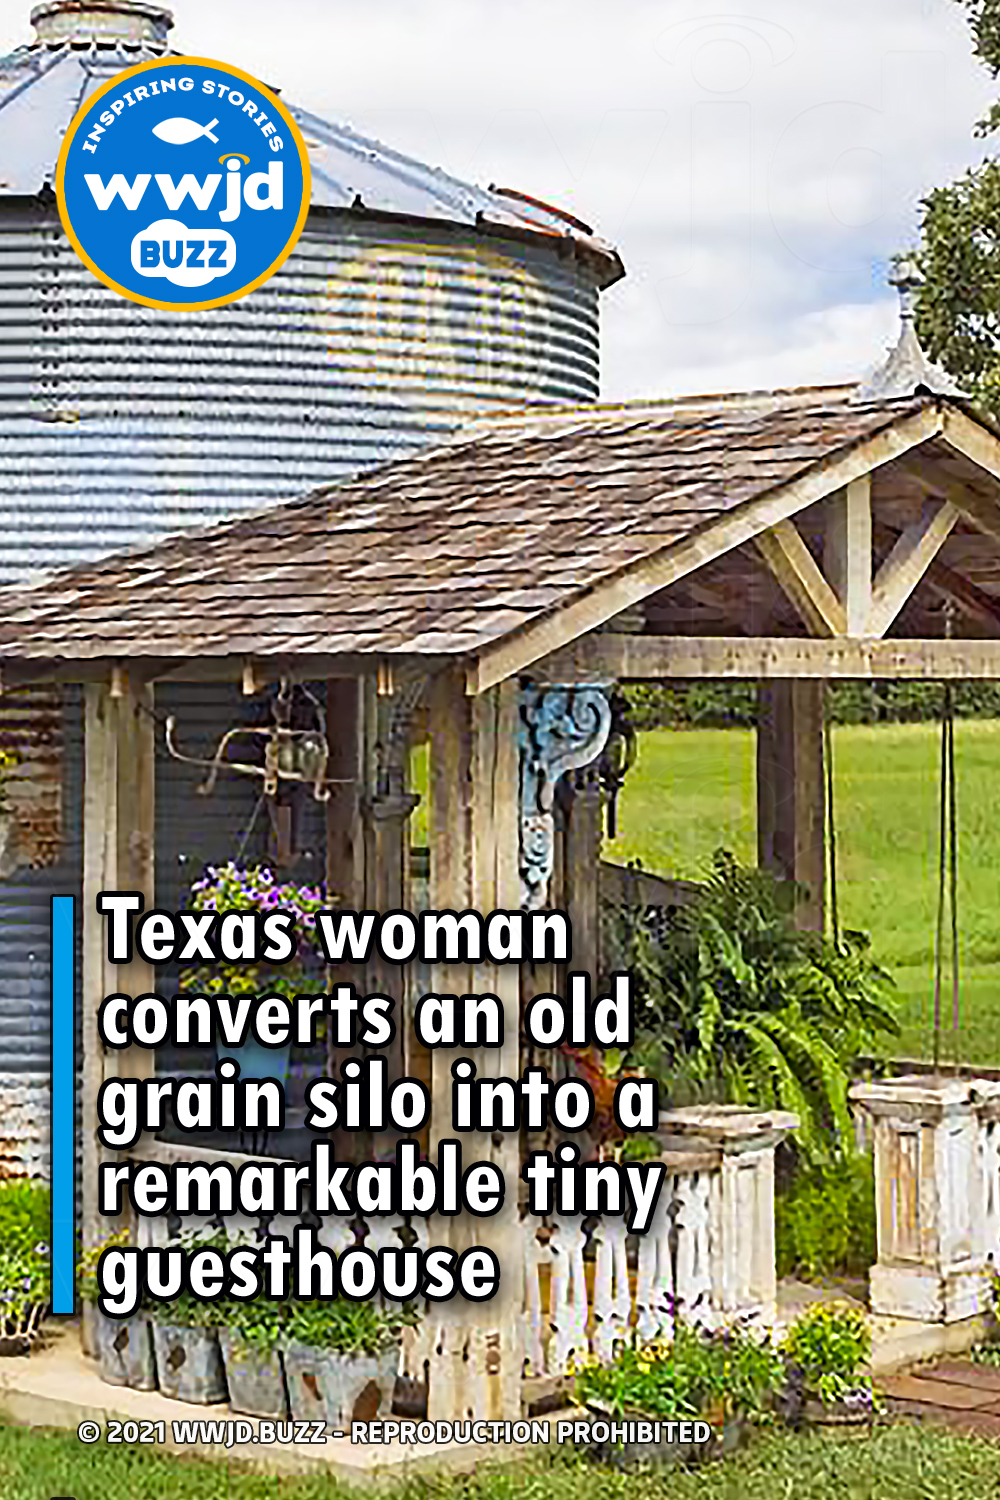 Texas woman converts an old grain silo into a remarkable tiny guesthouse